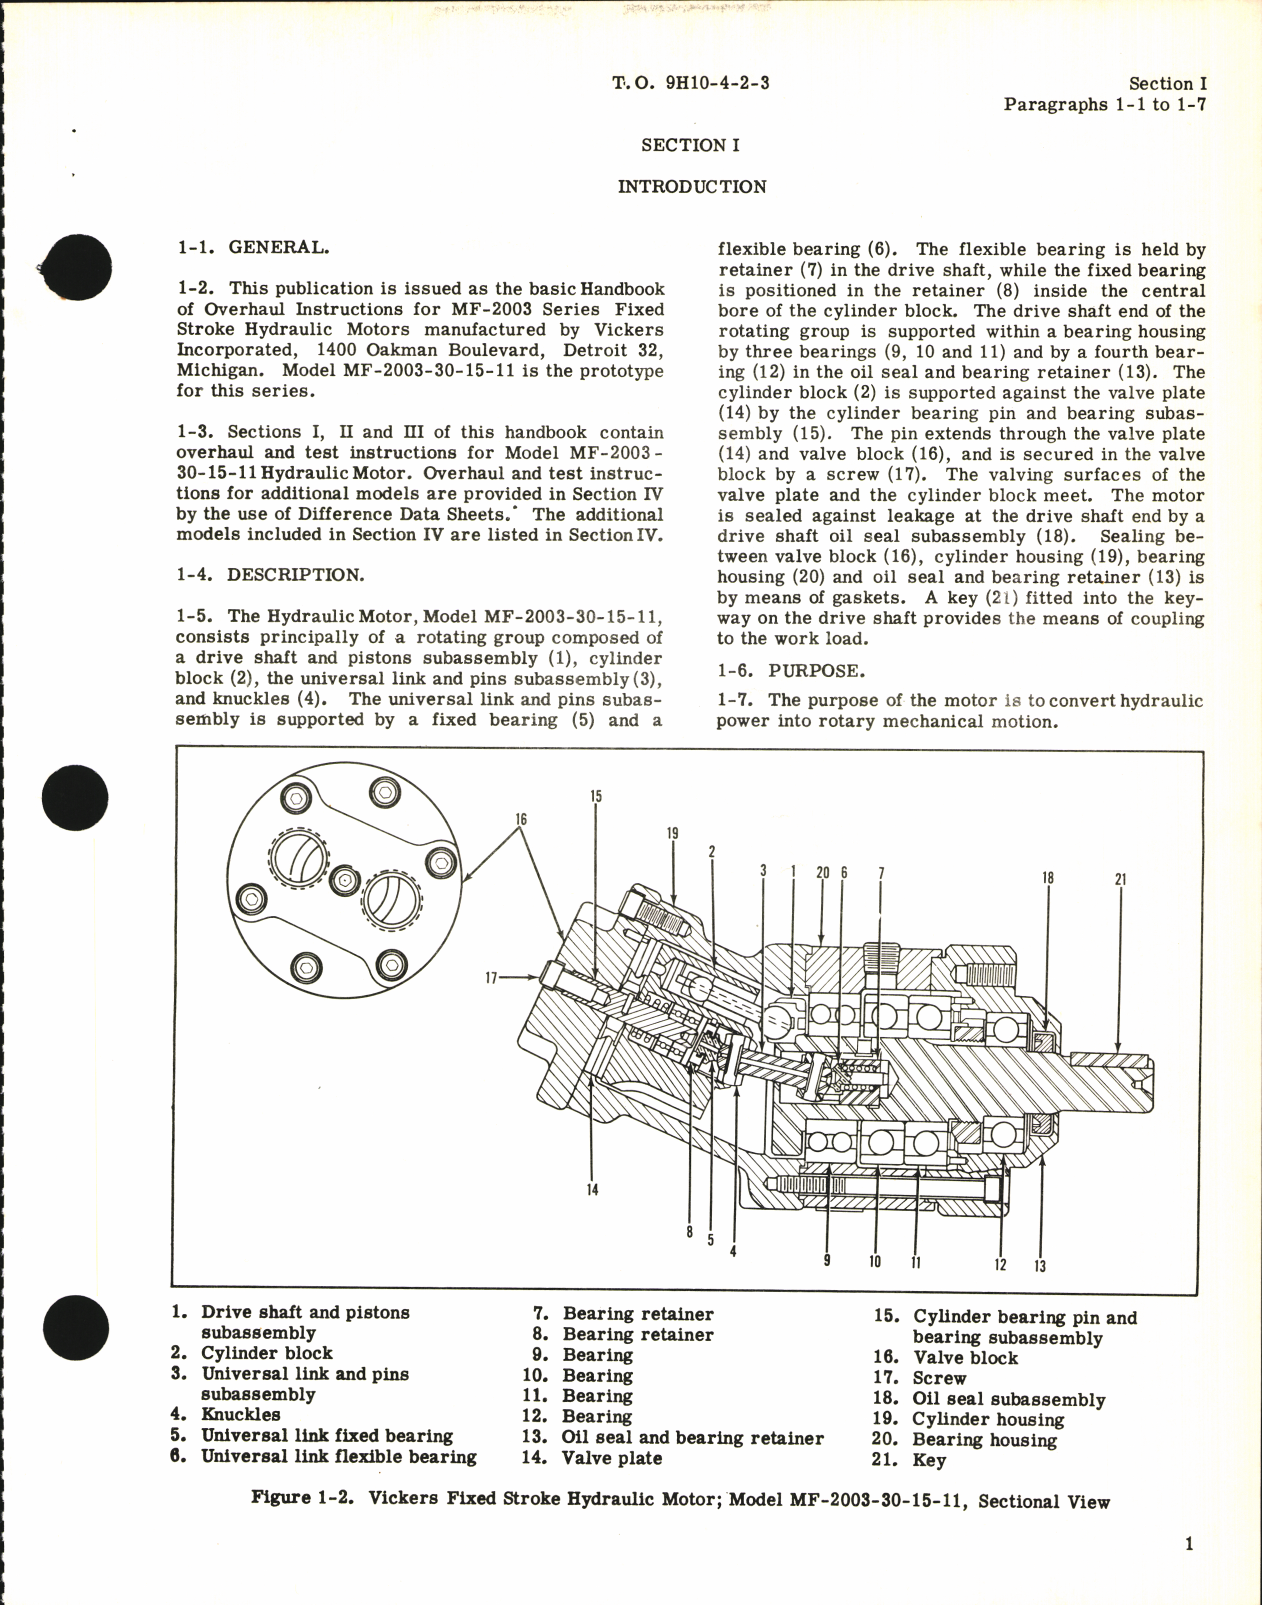 Sample page 5 from AirCorps Library document: Handbook of Overhaul Instructions for Hydraulic Motor Assembly 